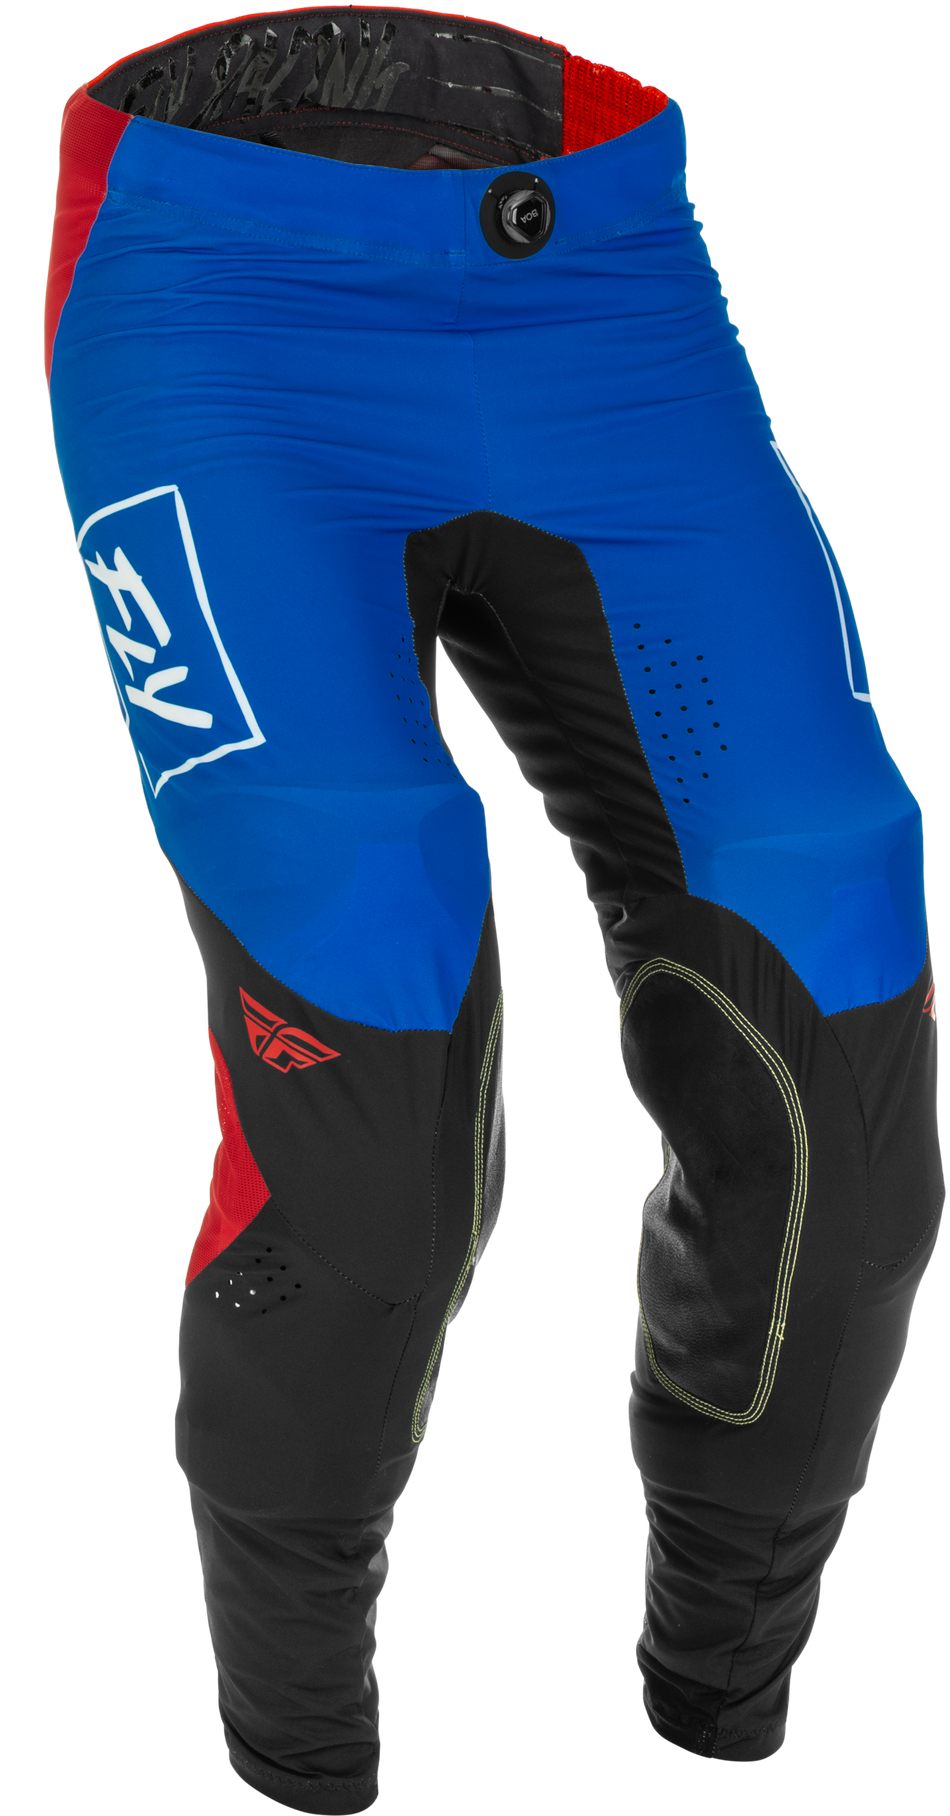 FLY RACING Lite Pants Red/White/Blue Size 34 375-73334